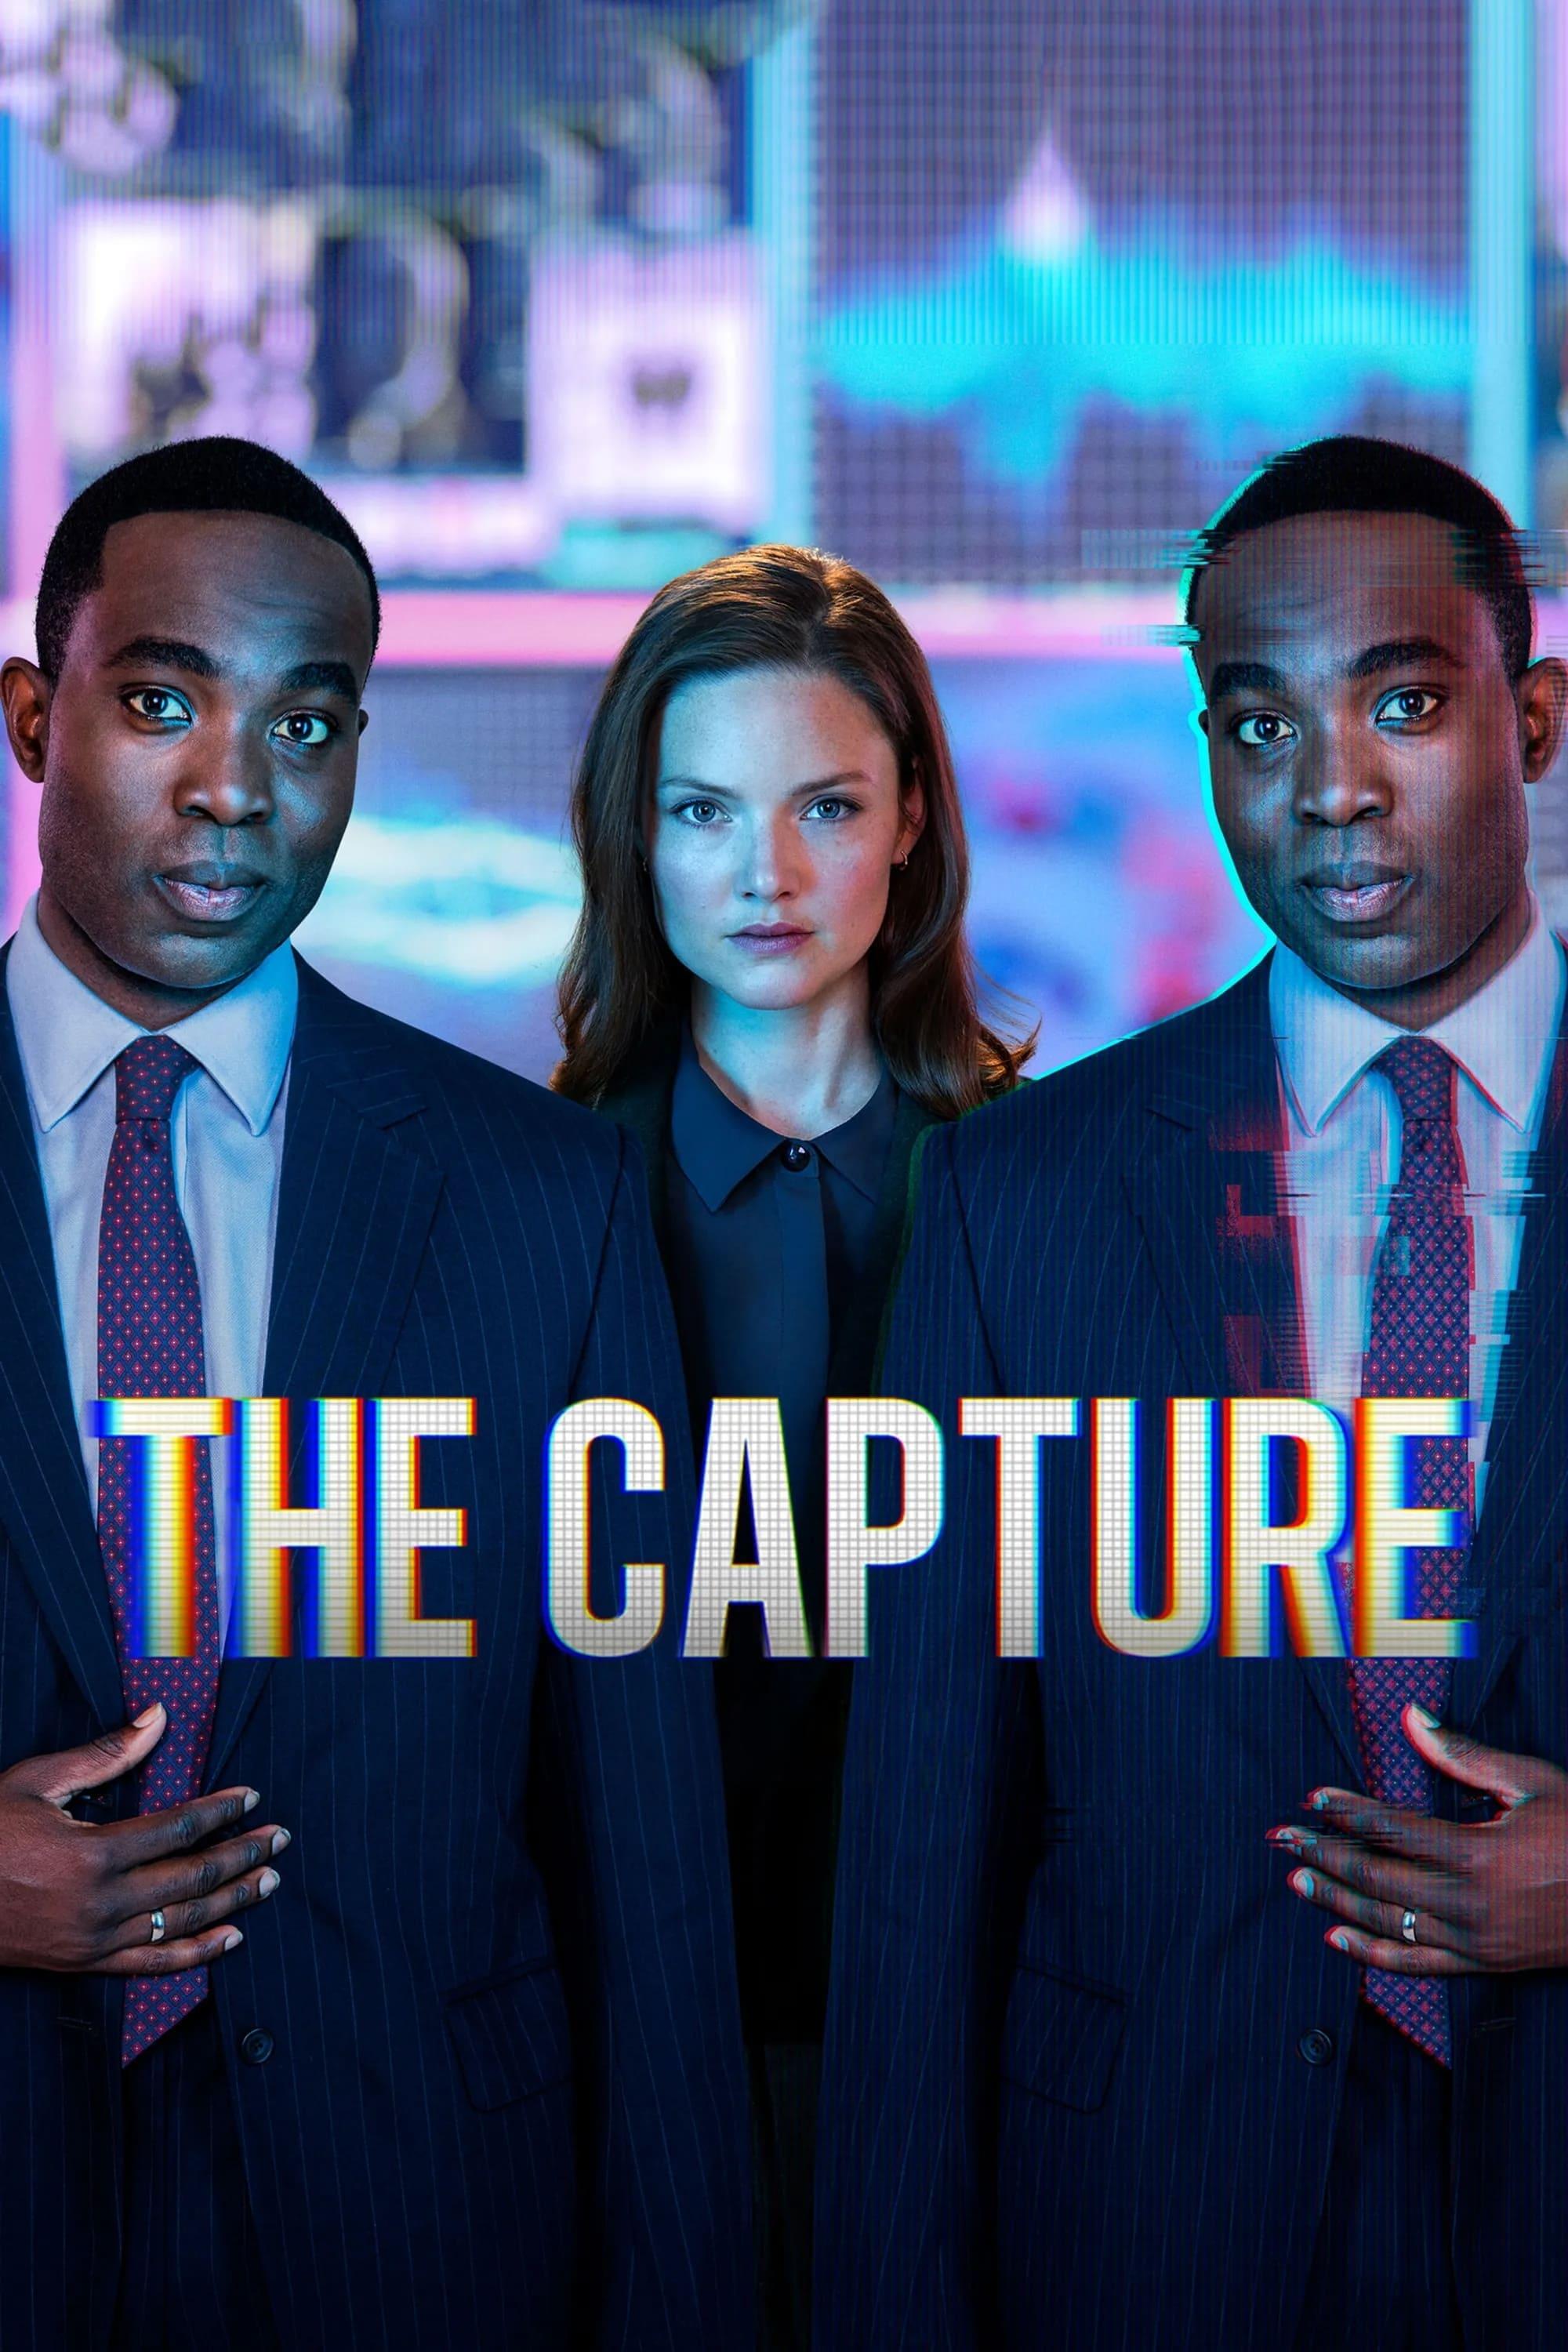 The Capture poster